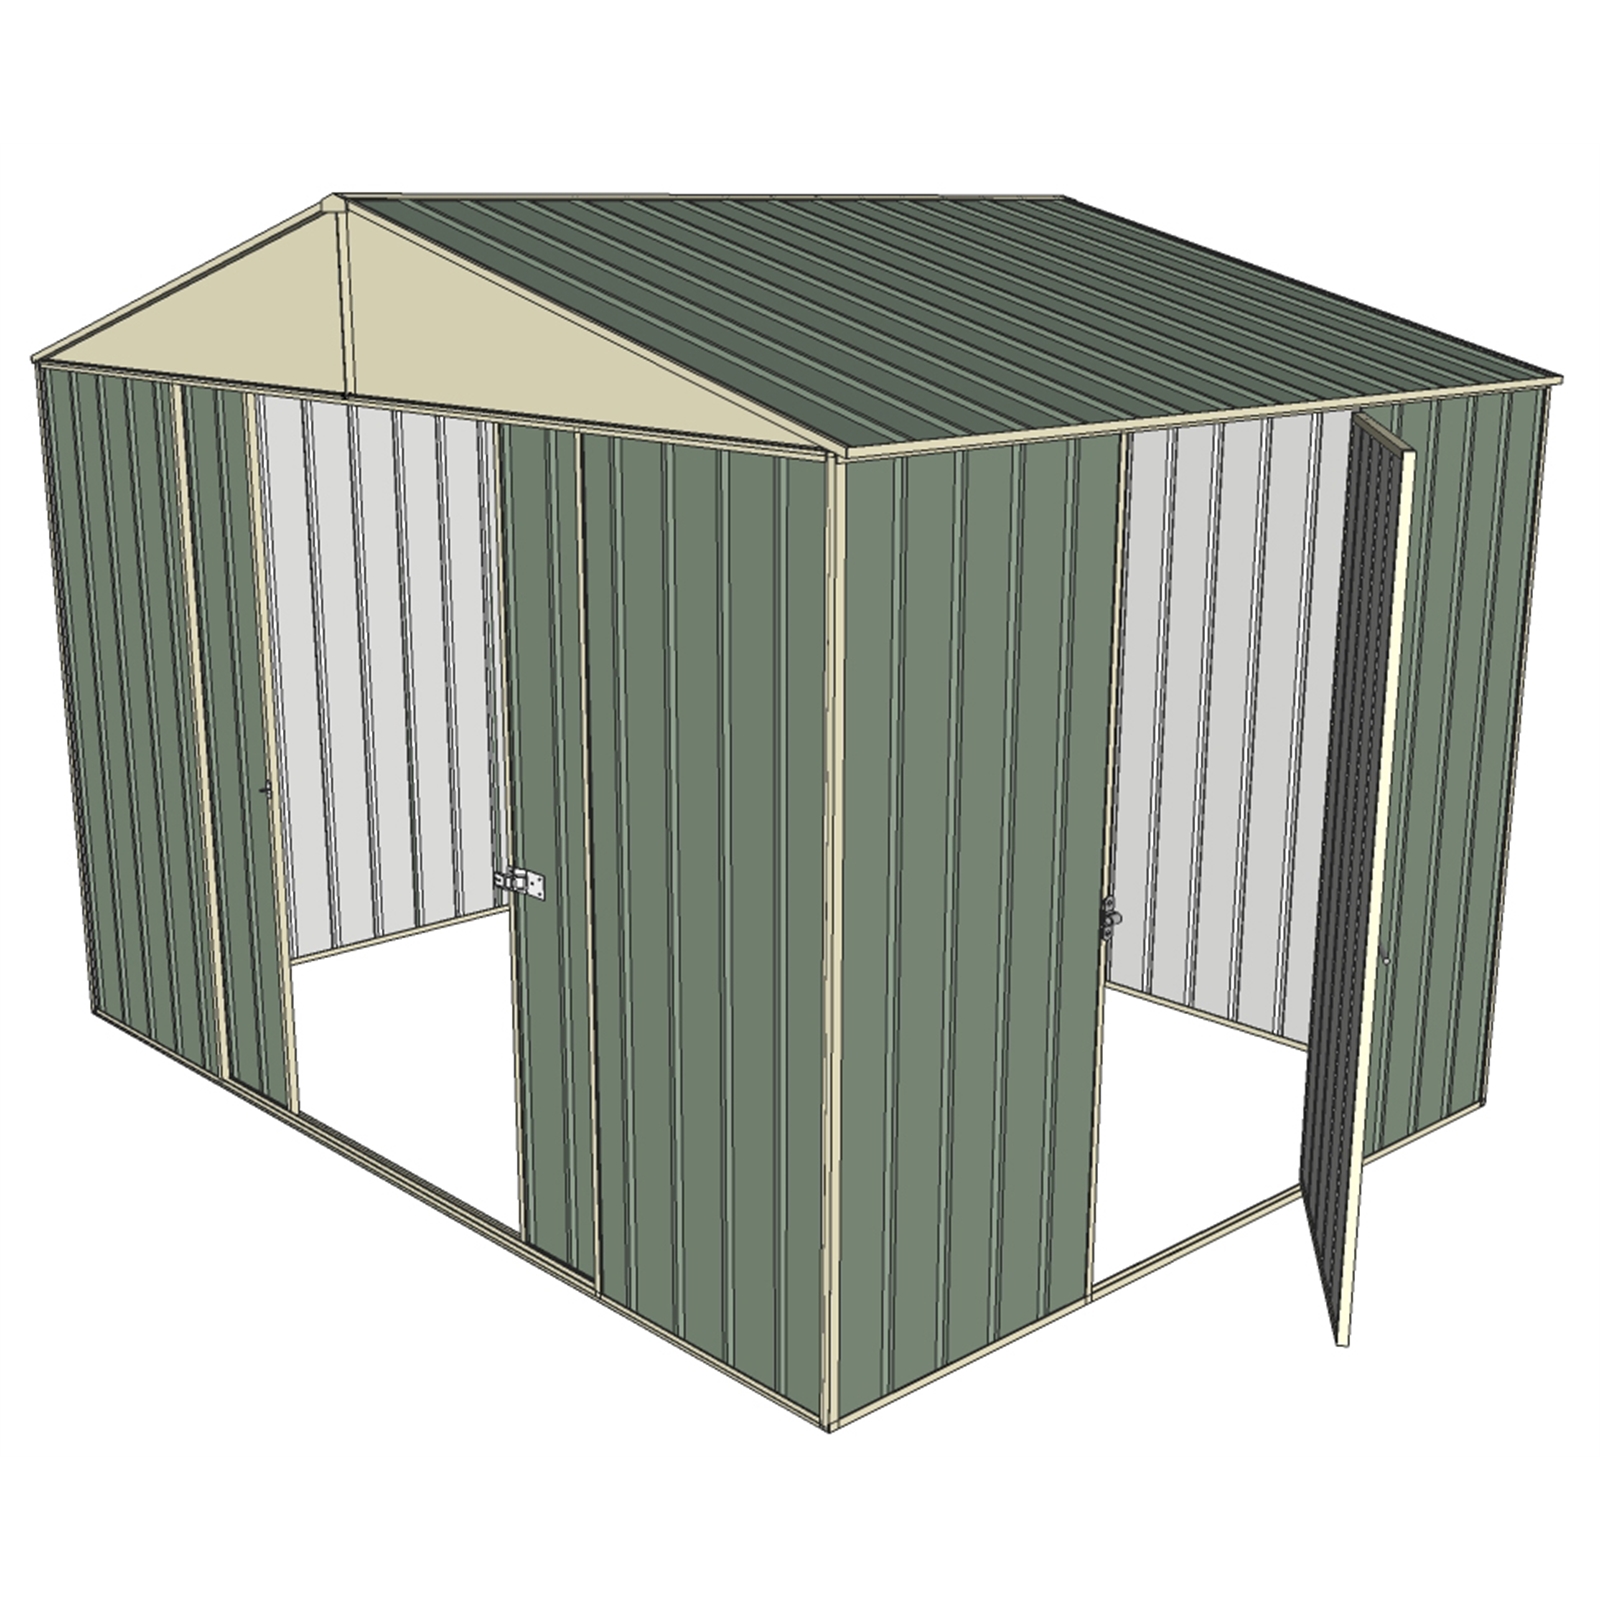 Build-a-Shed 3.0 x 2.3 x 2.3m Green Double Sliding and Single Hinge Door Narrow Shed